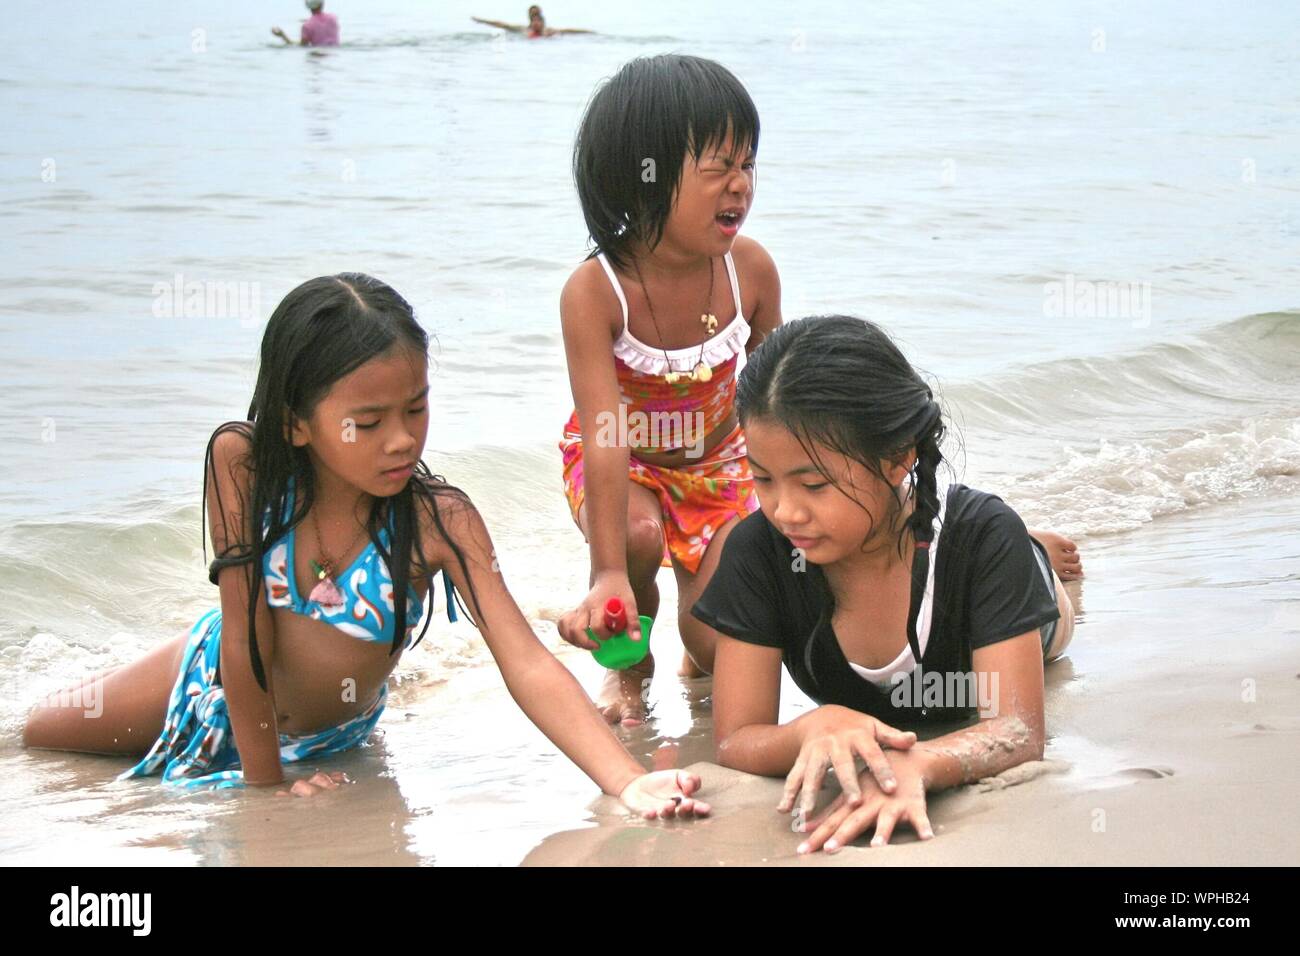 Girls Playing On Shore At Beach Stock Photo